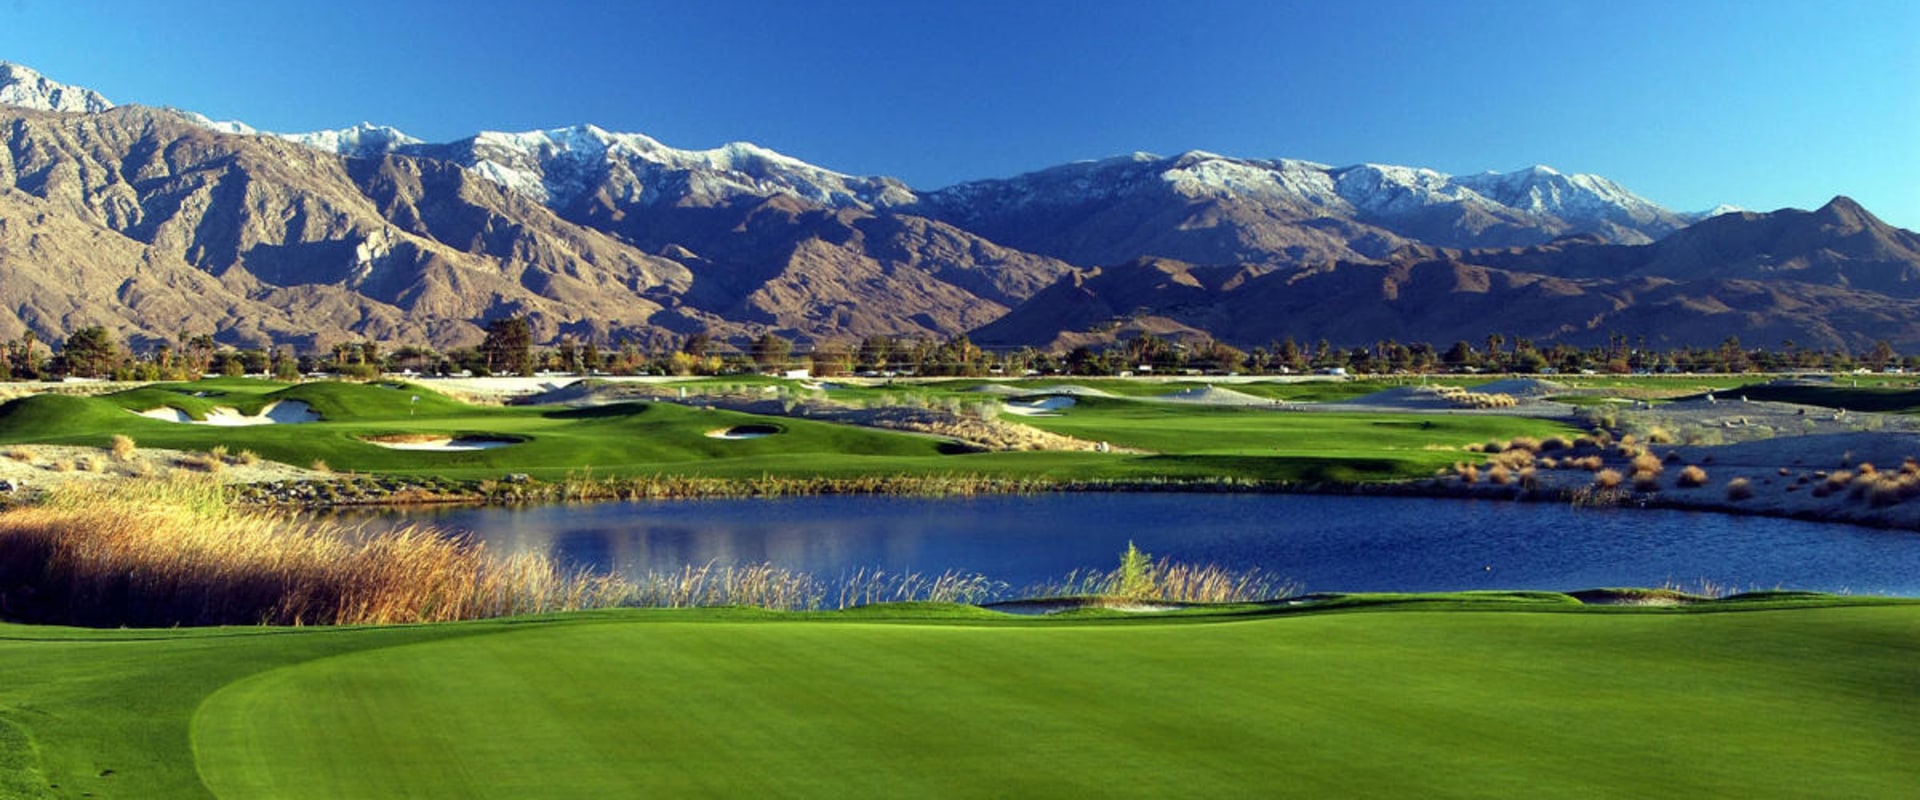 The Best Family-Friendly Golf Courses in Southern California